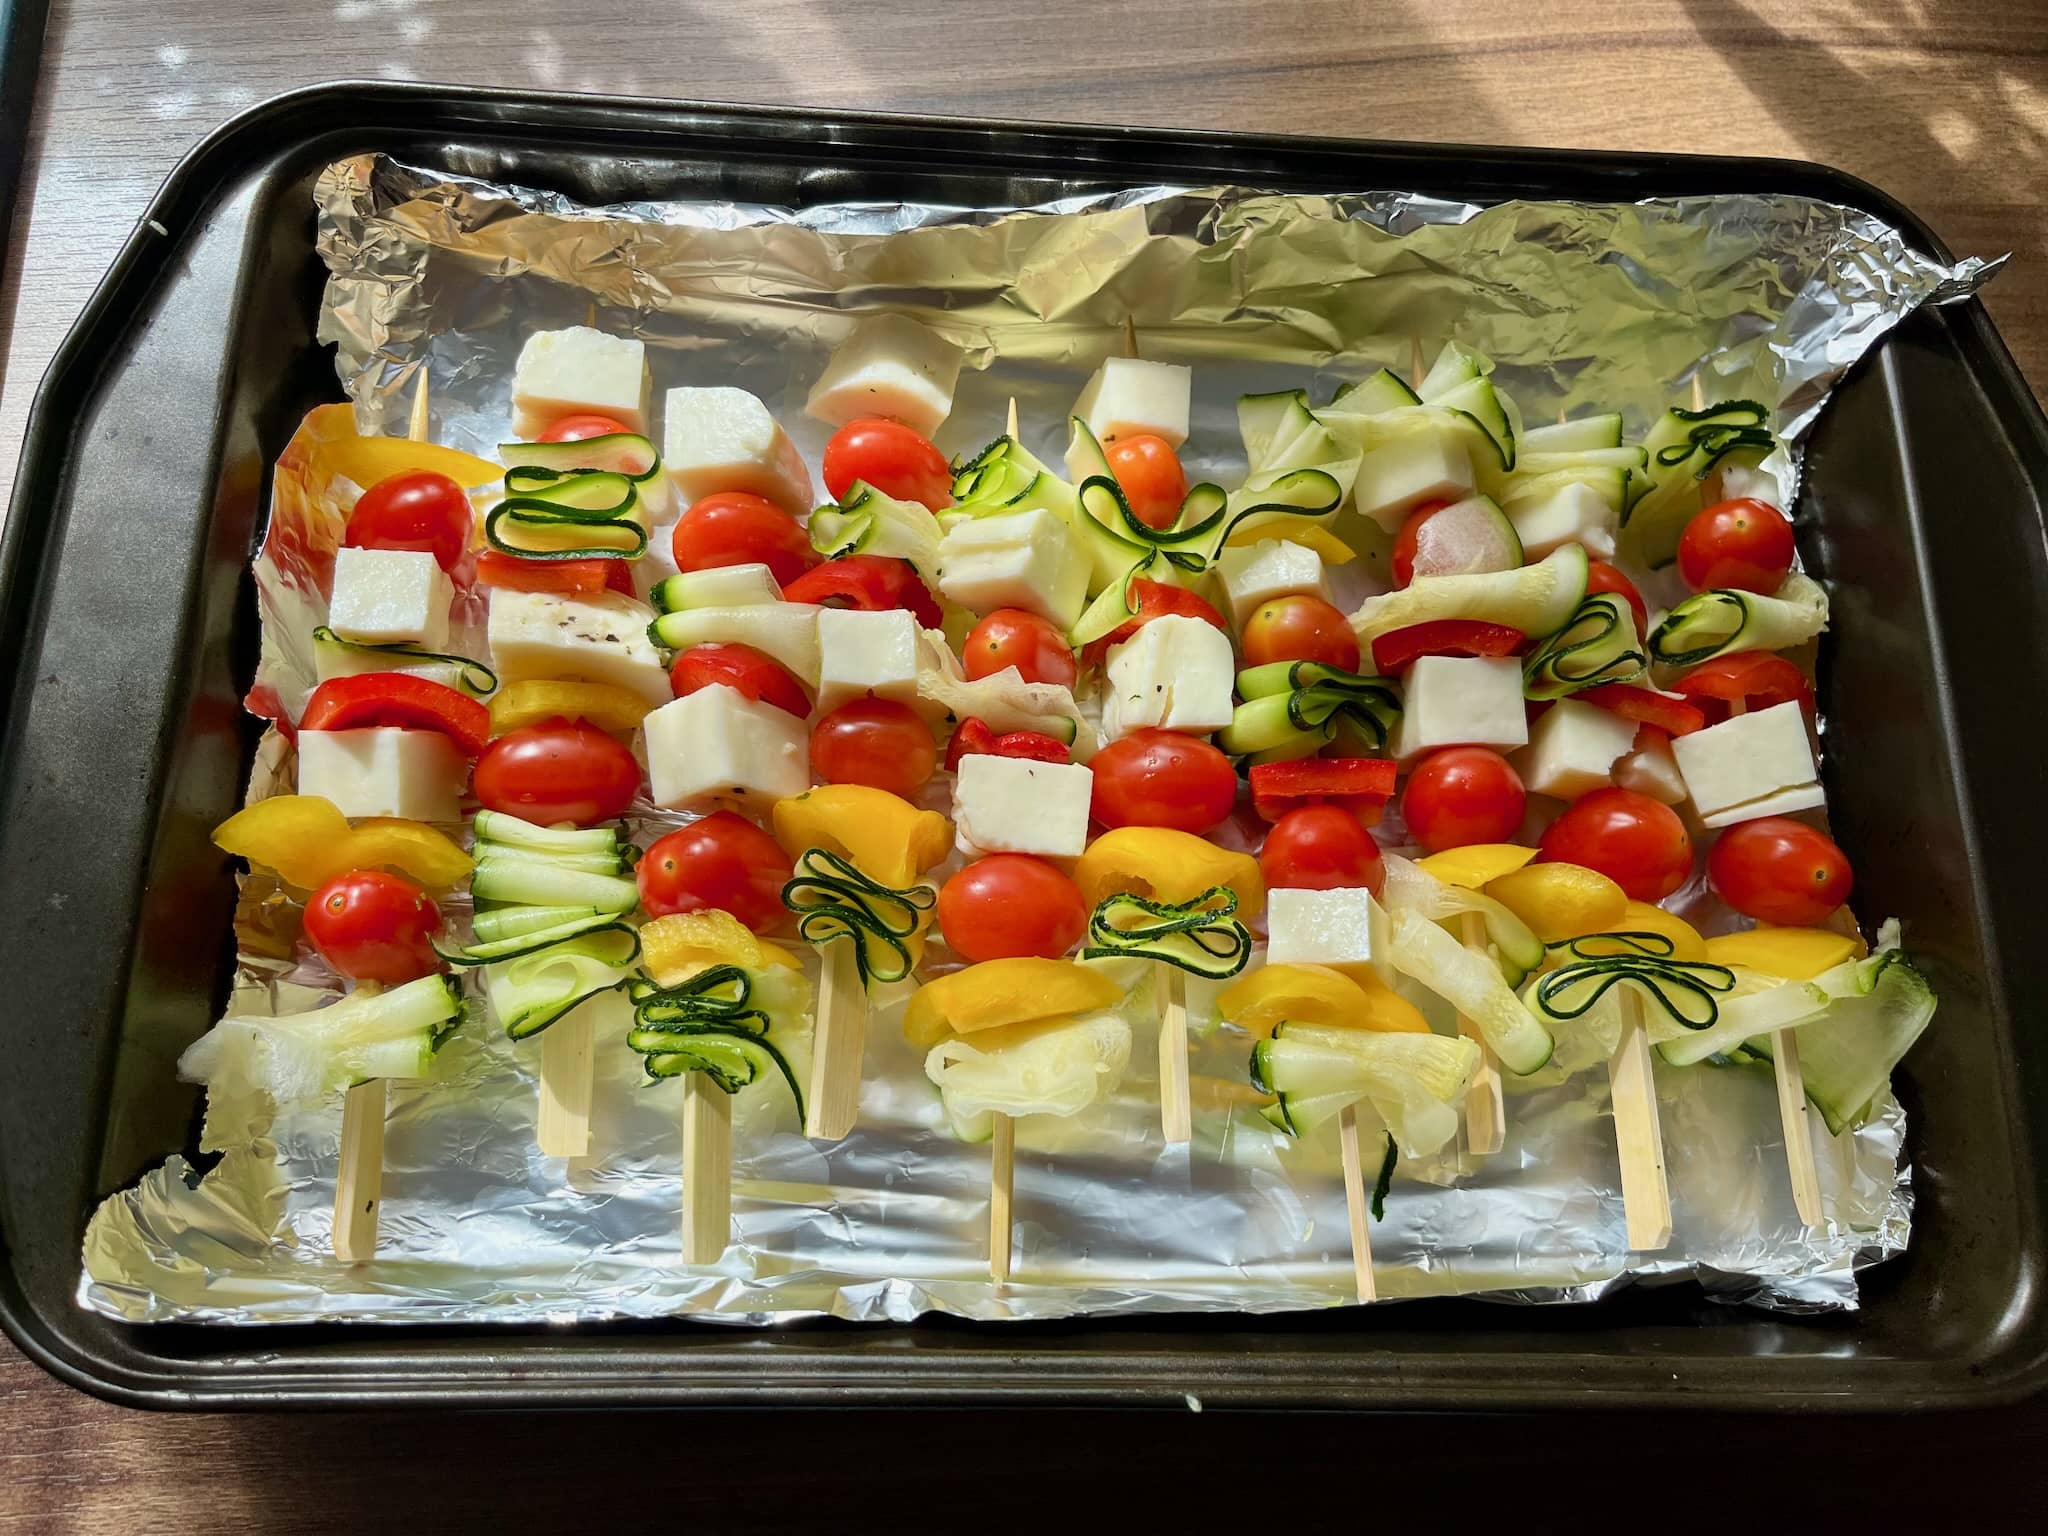 Stuffed pieces of vegetables and chees on skewers placed on a baking tray